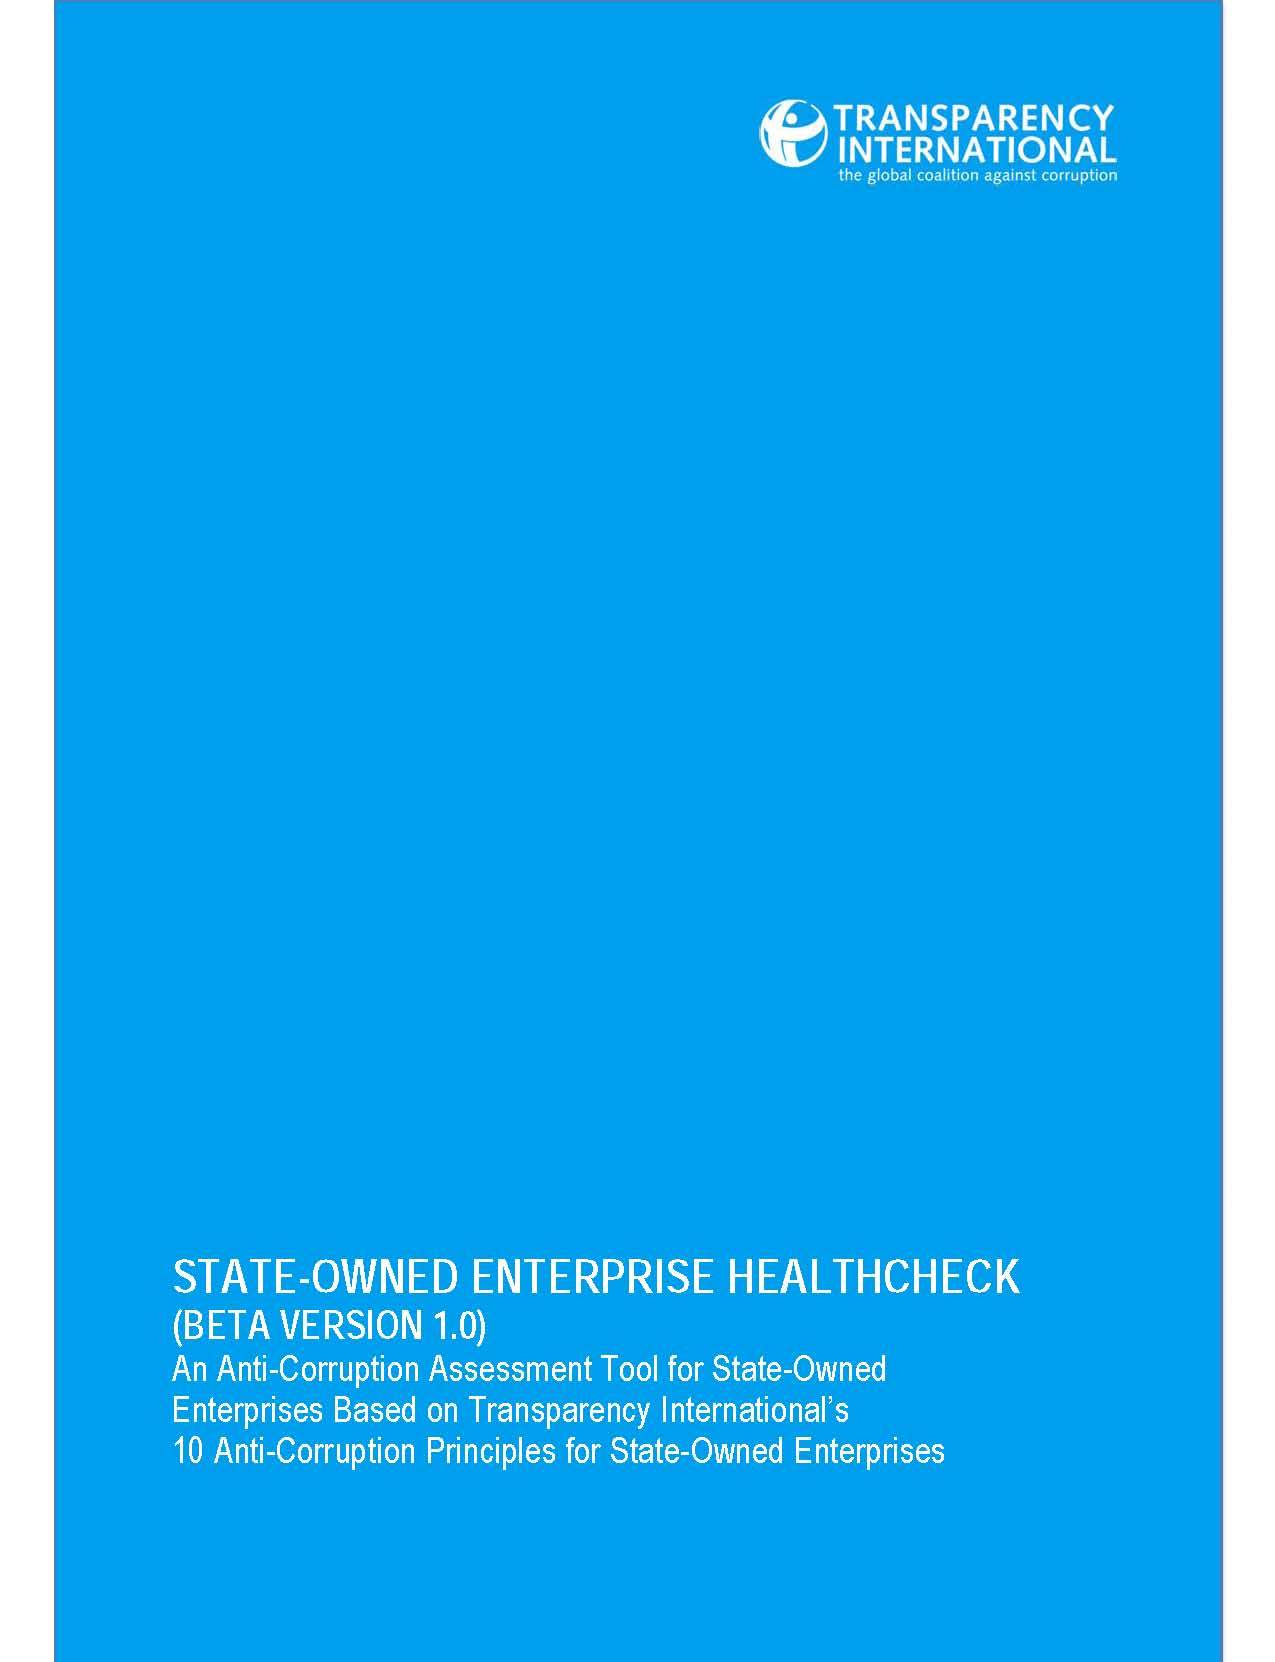 State-owned enterprise health check